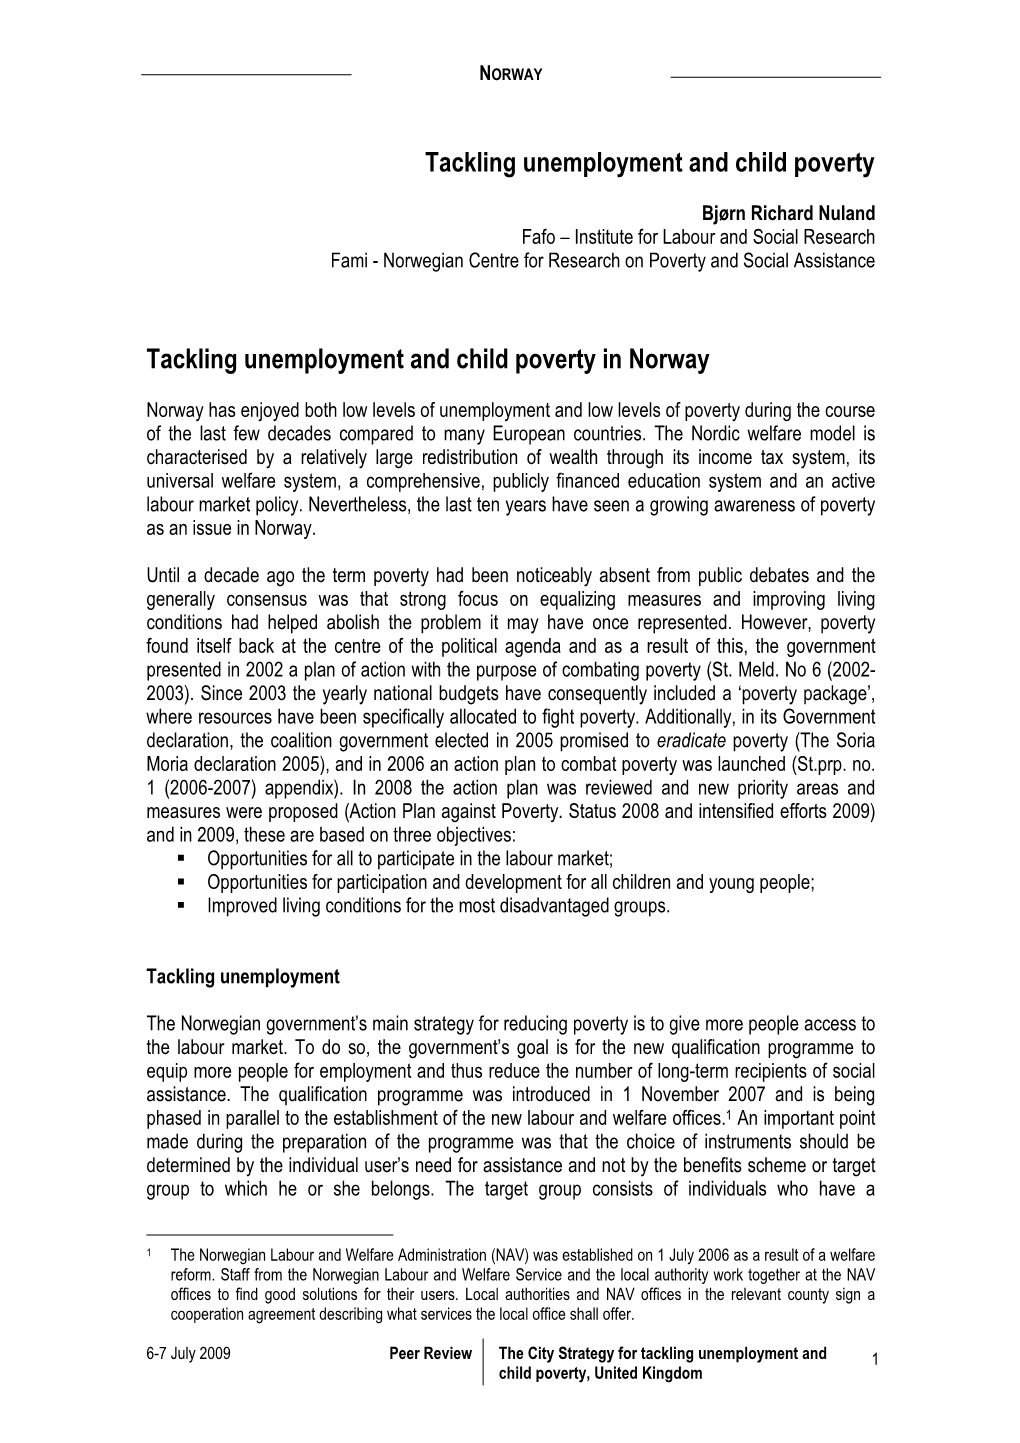 Tackling Unemployment and Child Poverty